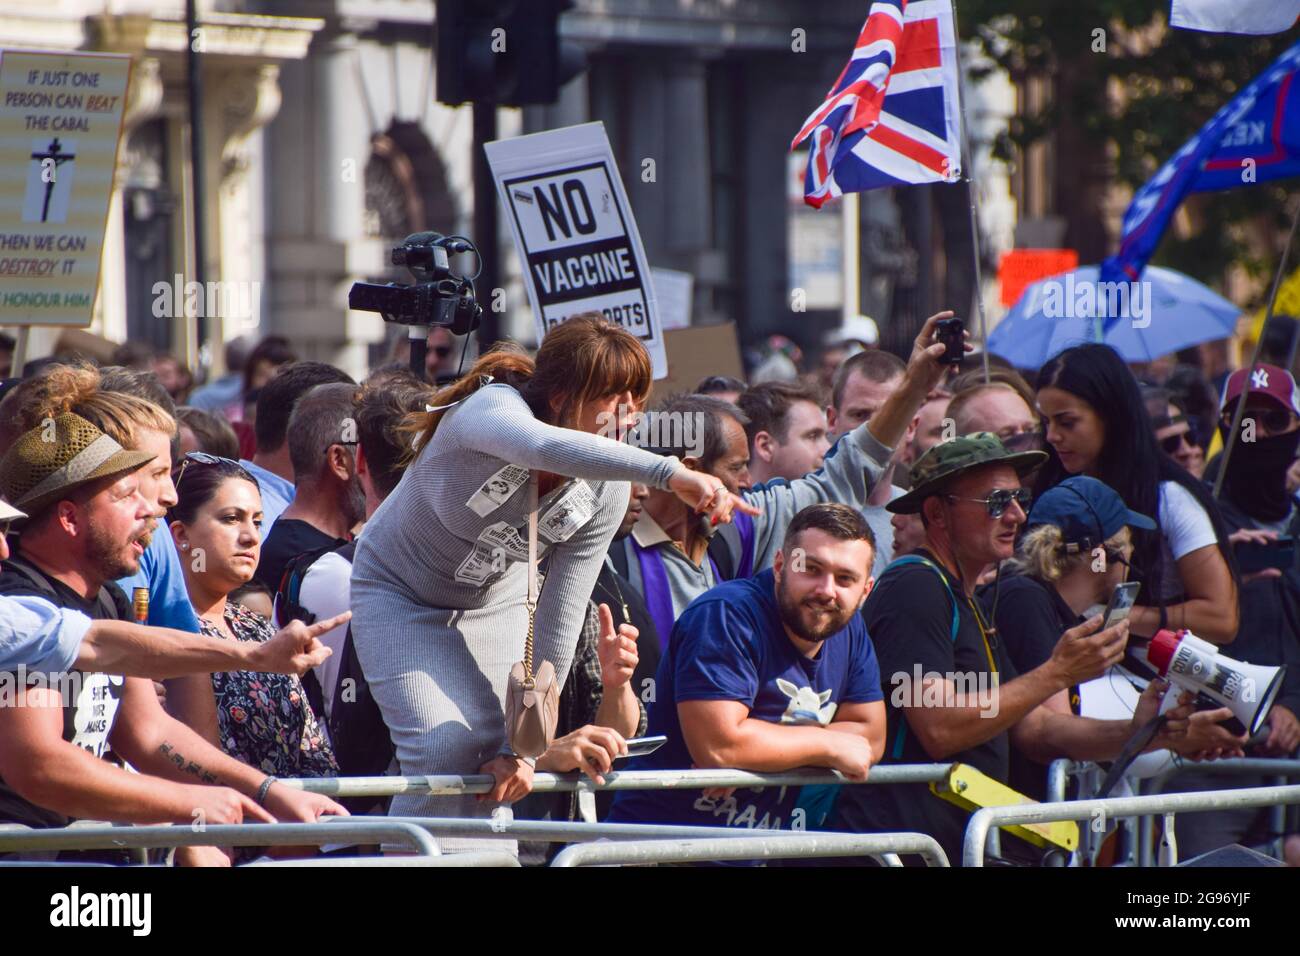 London, United Kingdom. 24th July 2021. Protesters outside Downing Street. Thousands of protesters gathered in Westminster to protest against COVID-19 vaccinations, vaccine passports, and coronavirus restrictions, with many demonstrators calling the pandemic a 'hoax'. (Credit: Vuk Valcic / Alamy Live News) Stock Photo